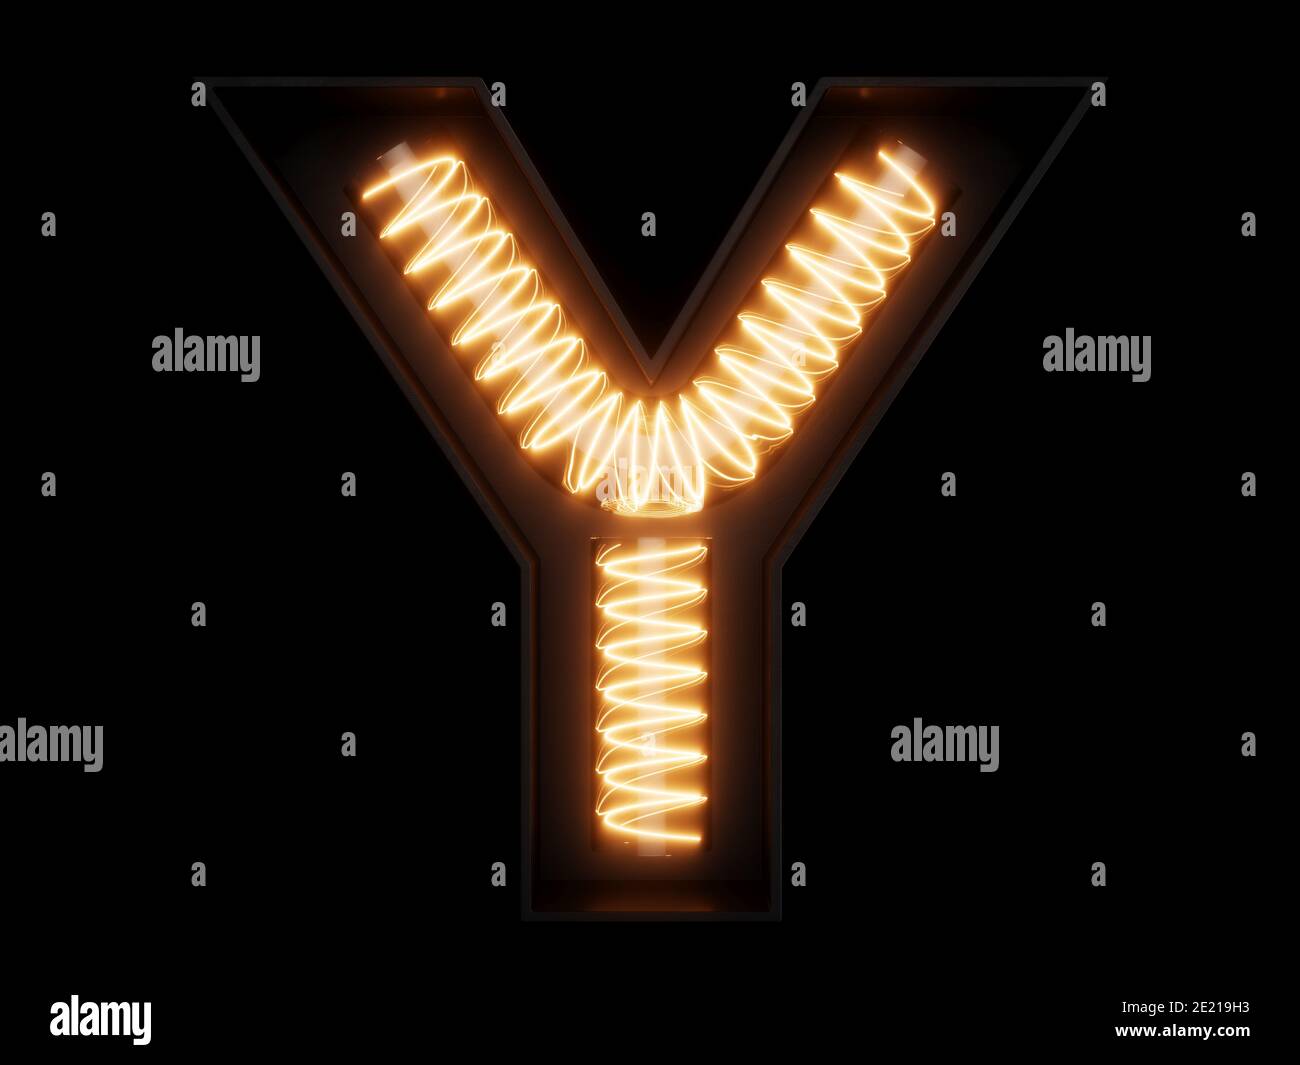 Light bulb glowing letter alphabet character Y font. Front view illuminated capital symbol on black background. 3d rendering illustration Stock Photo